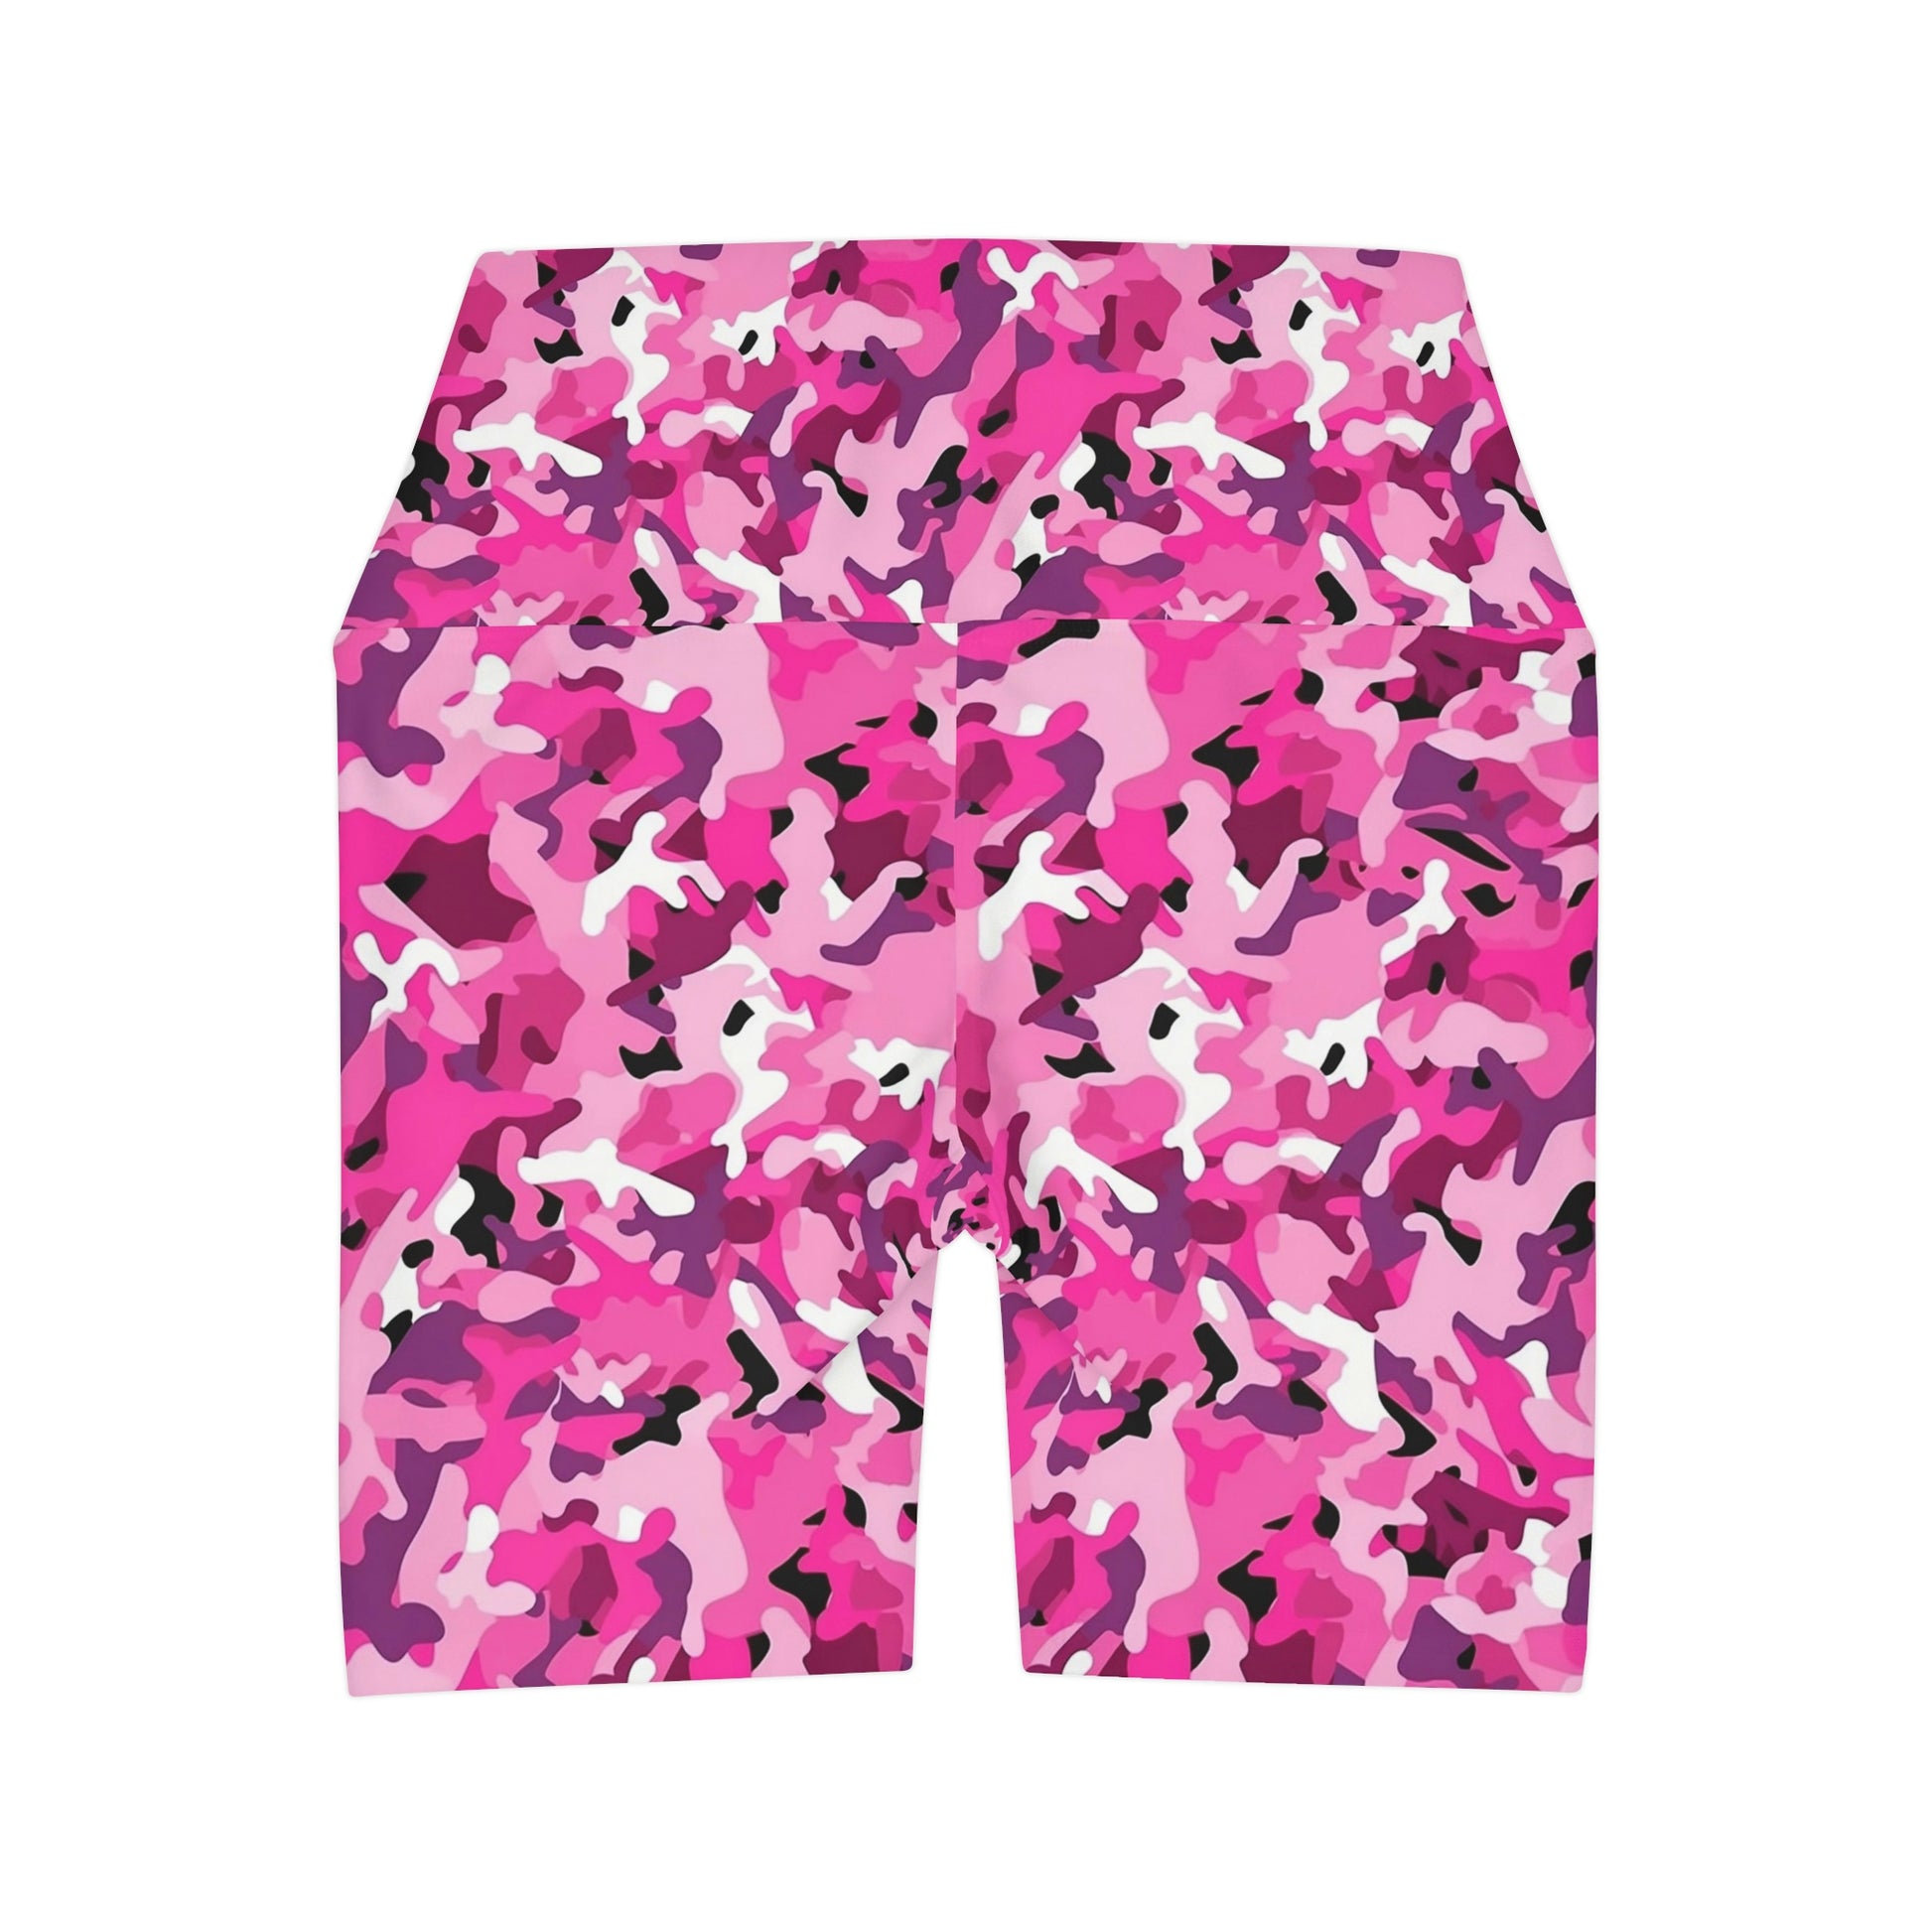 Pink Camo Women Shorts, Camouflage High Waisted Yoga Biker Sport Workout Gym Festival Running  Sexy Festival Spandex Bottoms Starcove Fashion